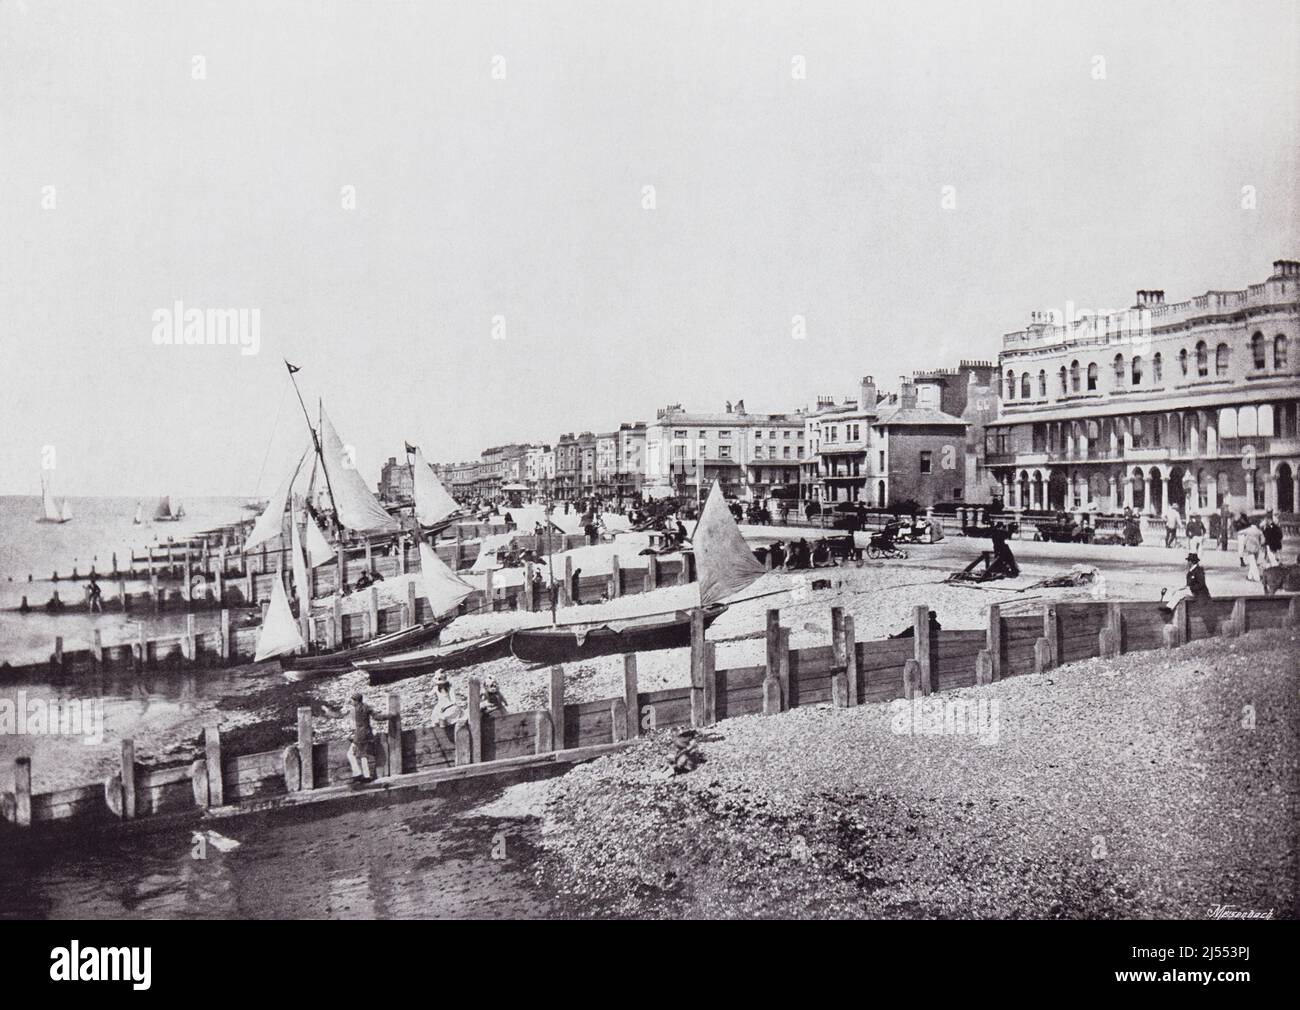 Worthing, West Sussex, England, seen here in the 19th century.  From Around The Coast,  An Album of Pictures from Photographs of the Chief Seaside Places of Interest in Great Britain and Ireland published London, 1895, by George Newnes Limited. Stock Photo